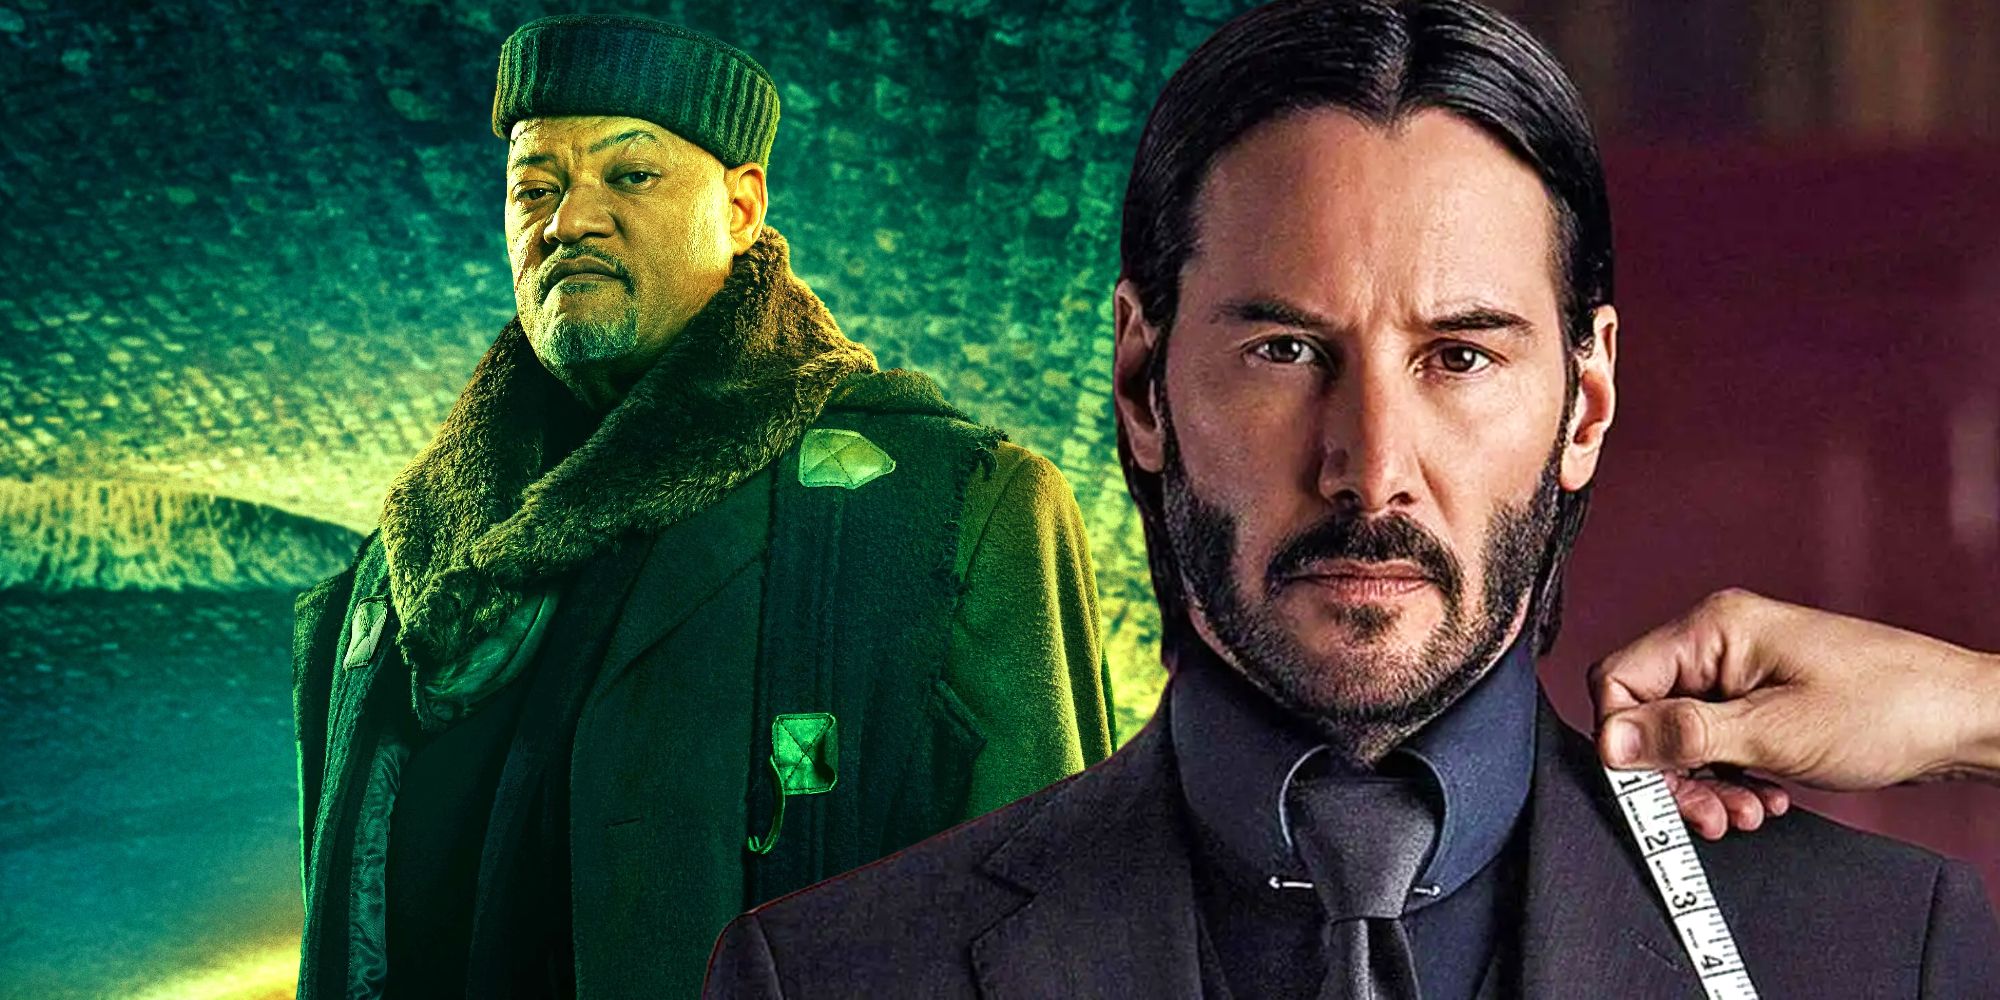 John Wick Tease Explains Why Keanu Reeves' Assassin Is The Most Feared